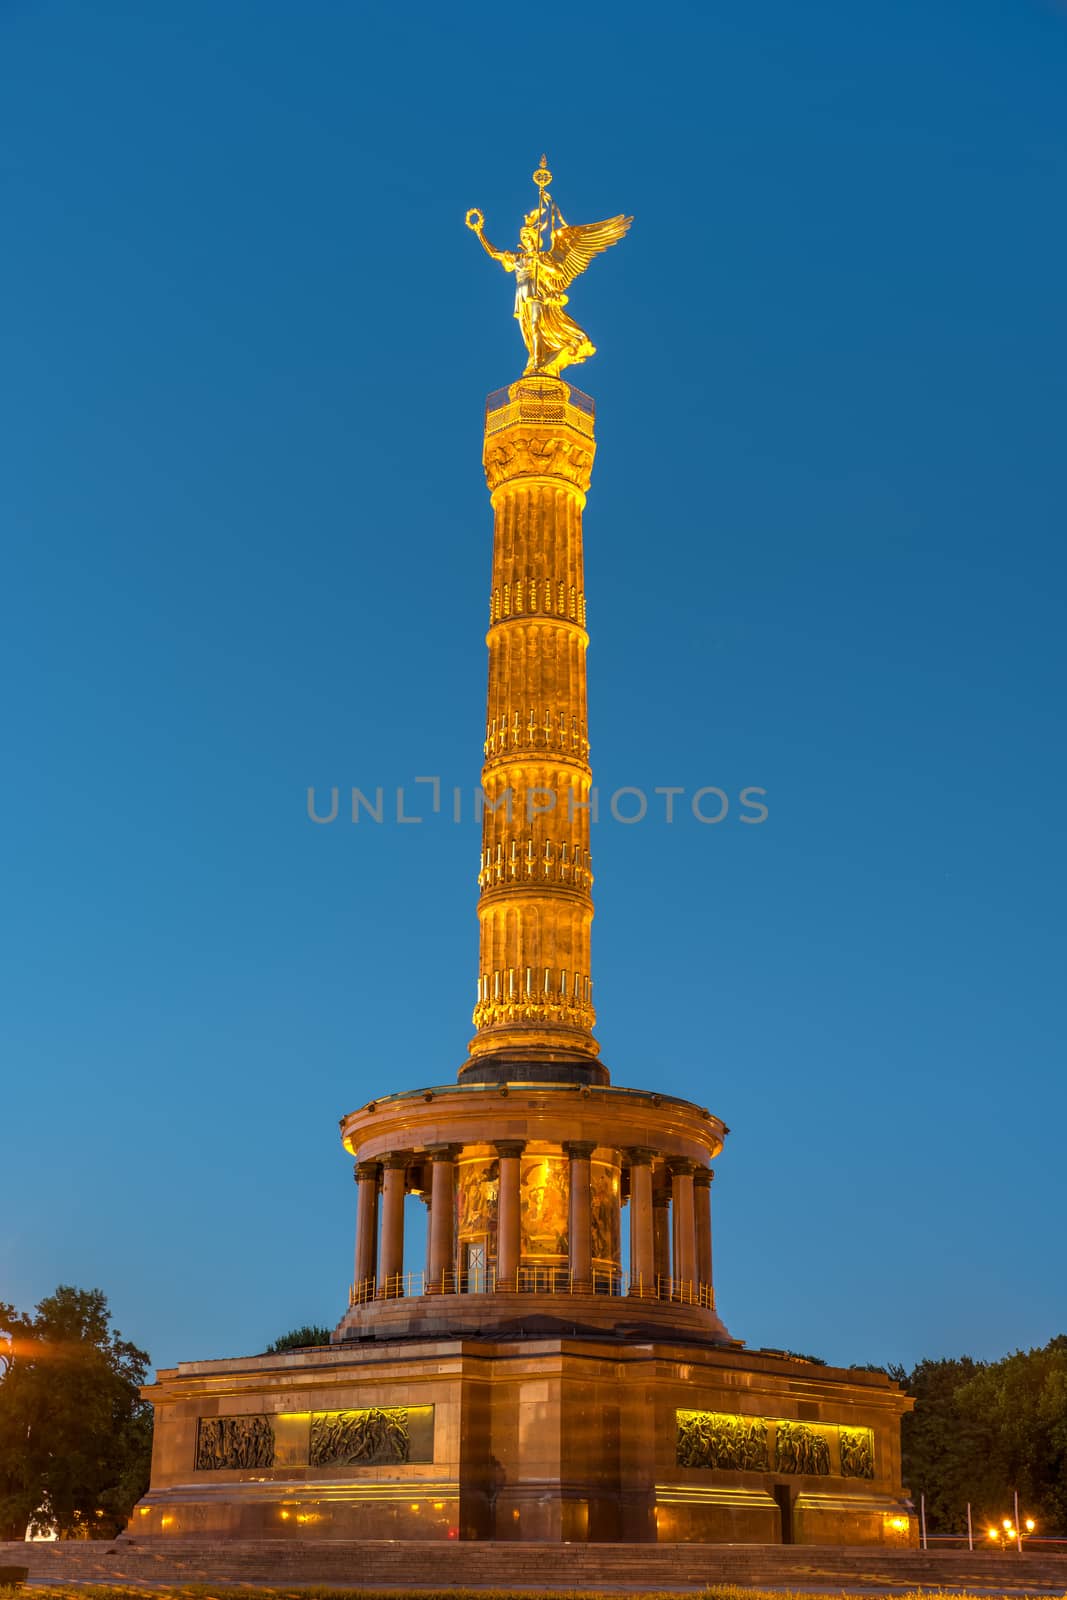 The Victory Column in Berlin at night